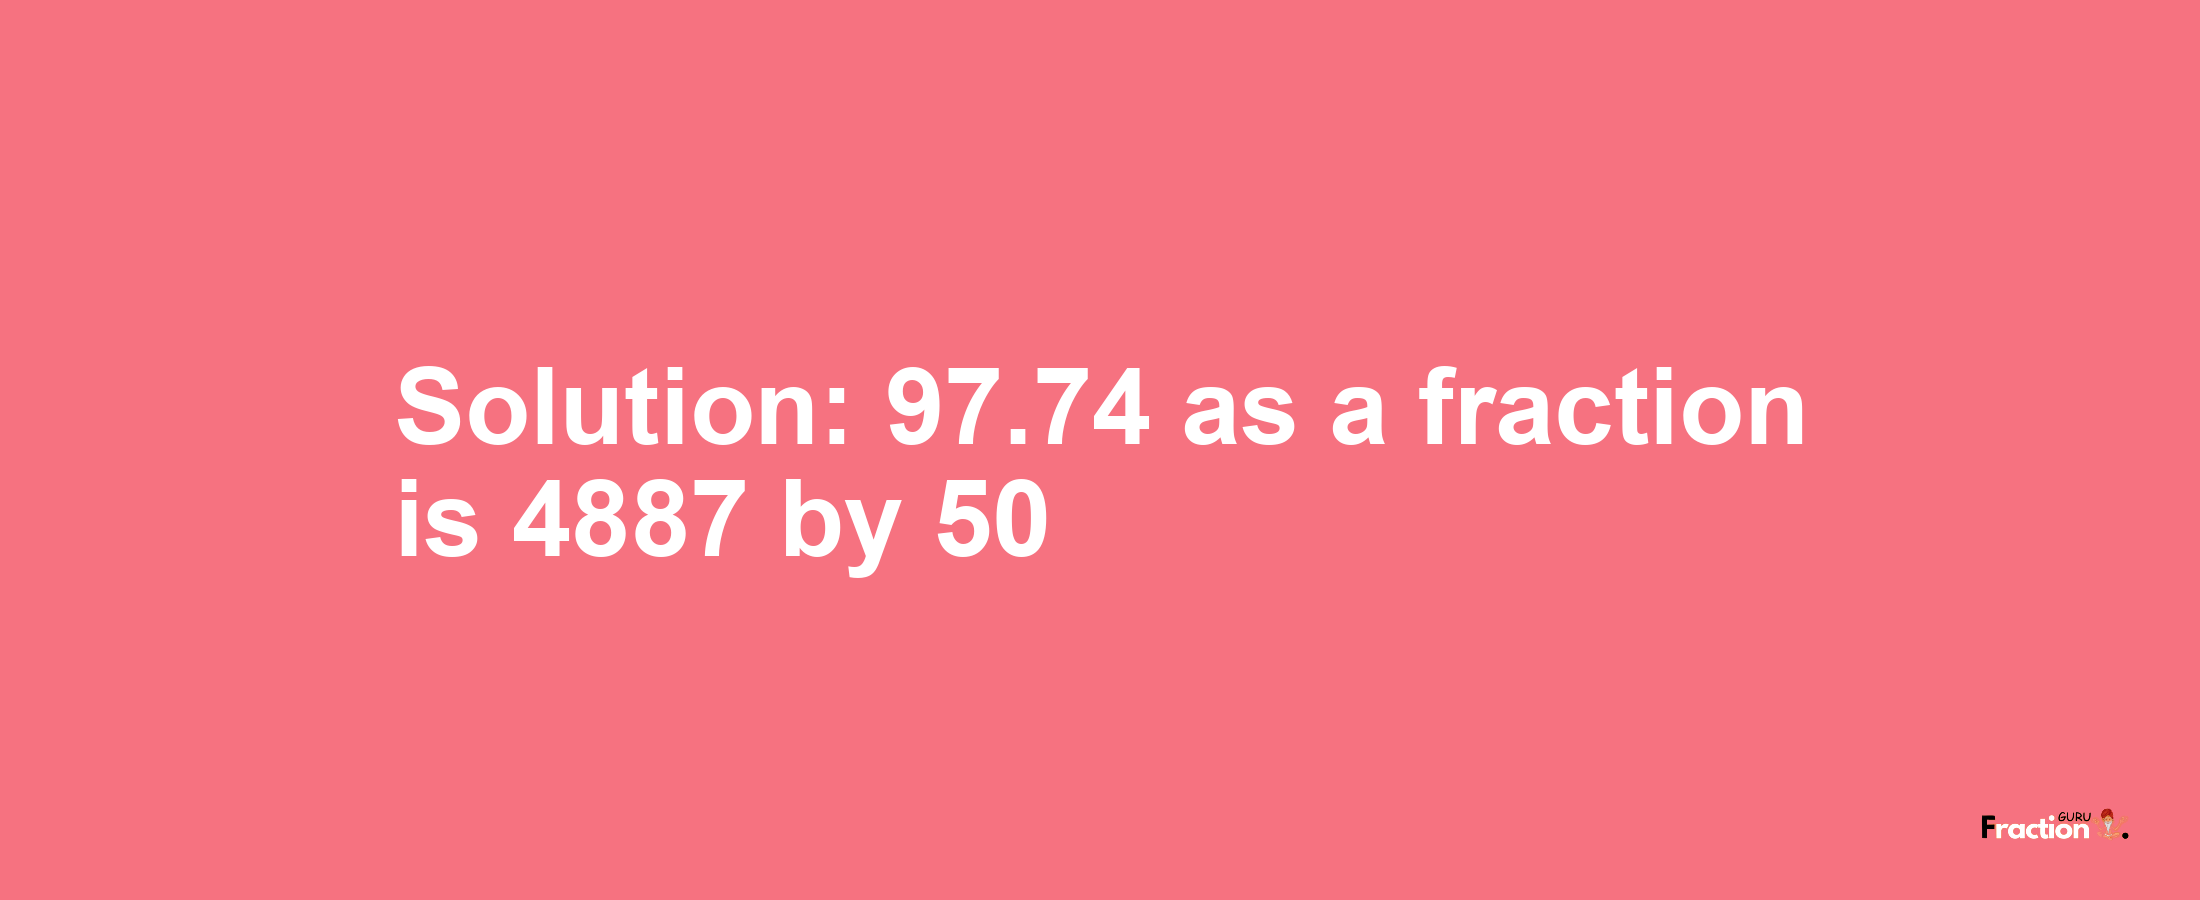 Solution:97.74 as a fraction is 4887/50